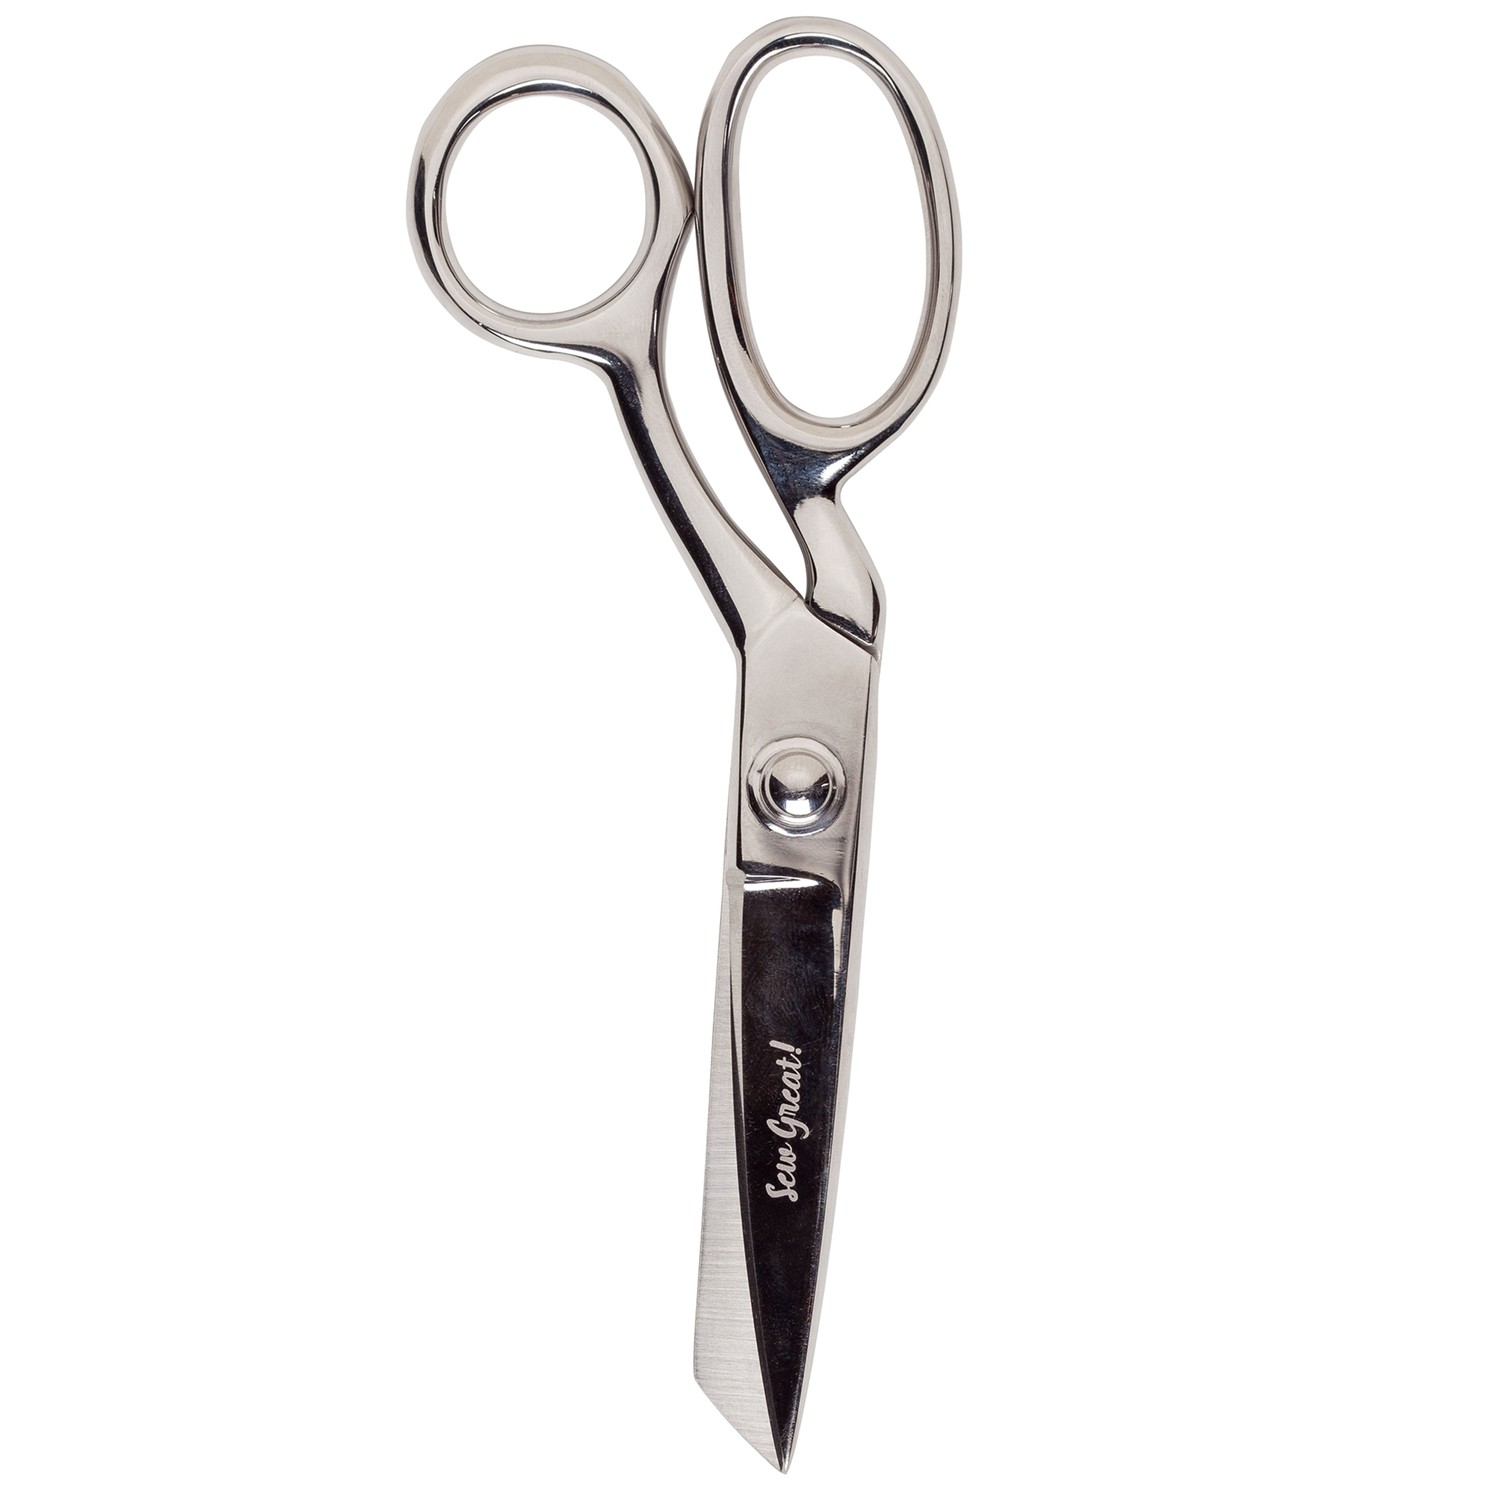 Sew Great 9 Classic Fabric Scissors by Connecting Threads